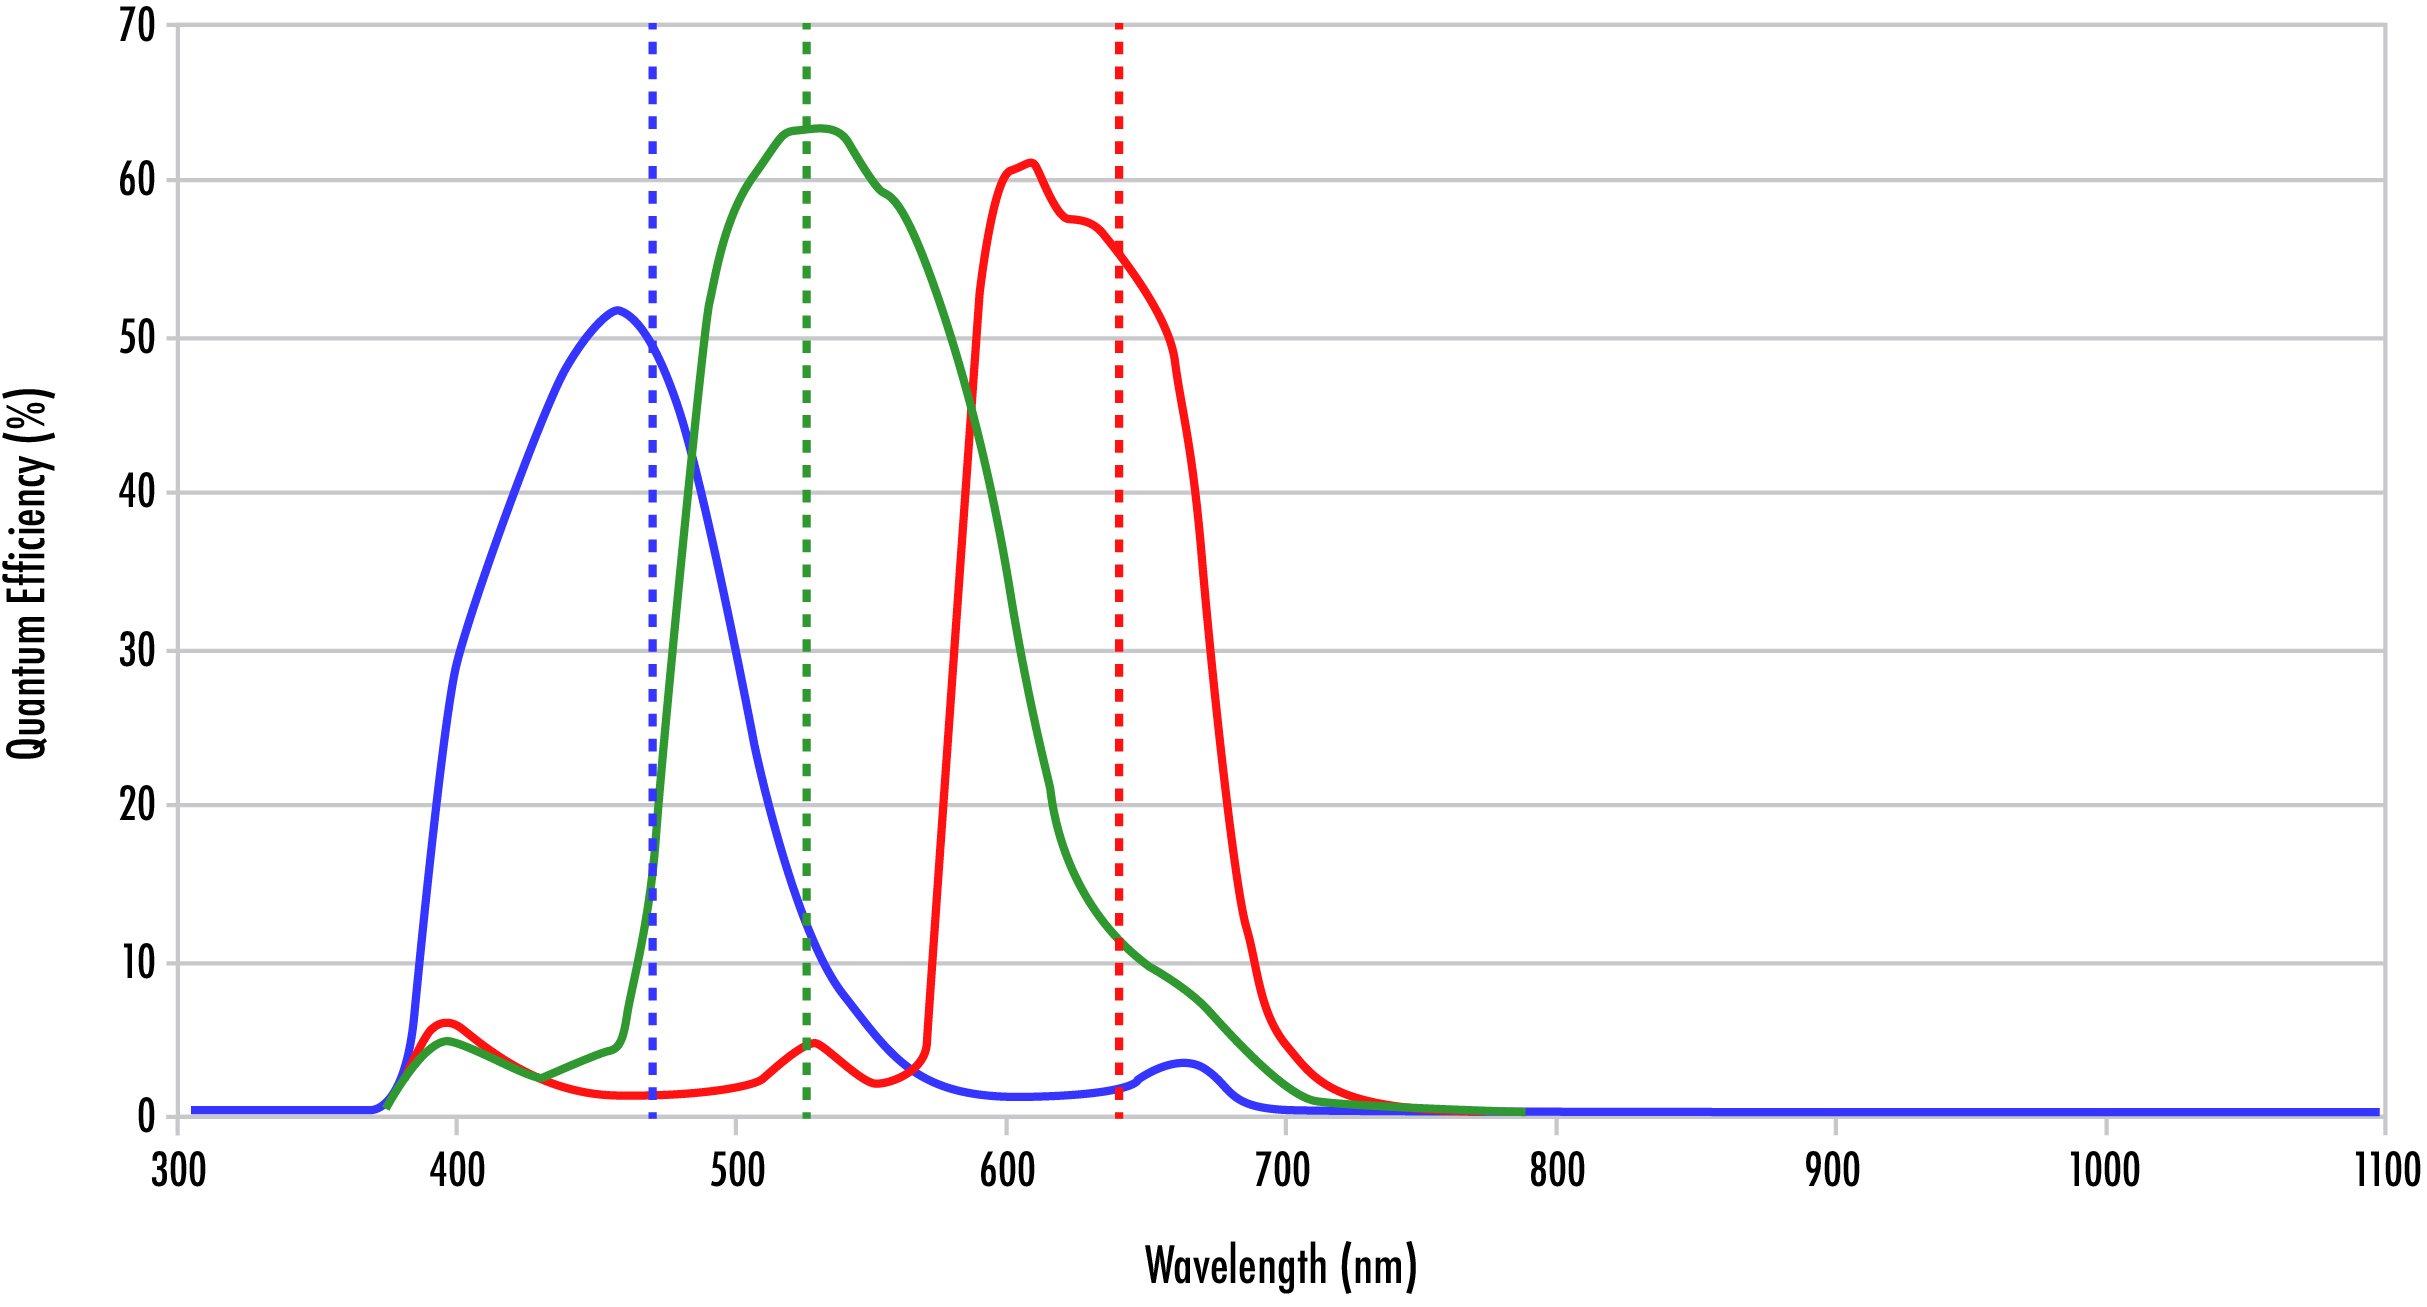  The quantum efficiency curve for an RGB camera showing the overlap between red, green, and blue sensitivities.